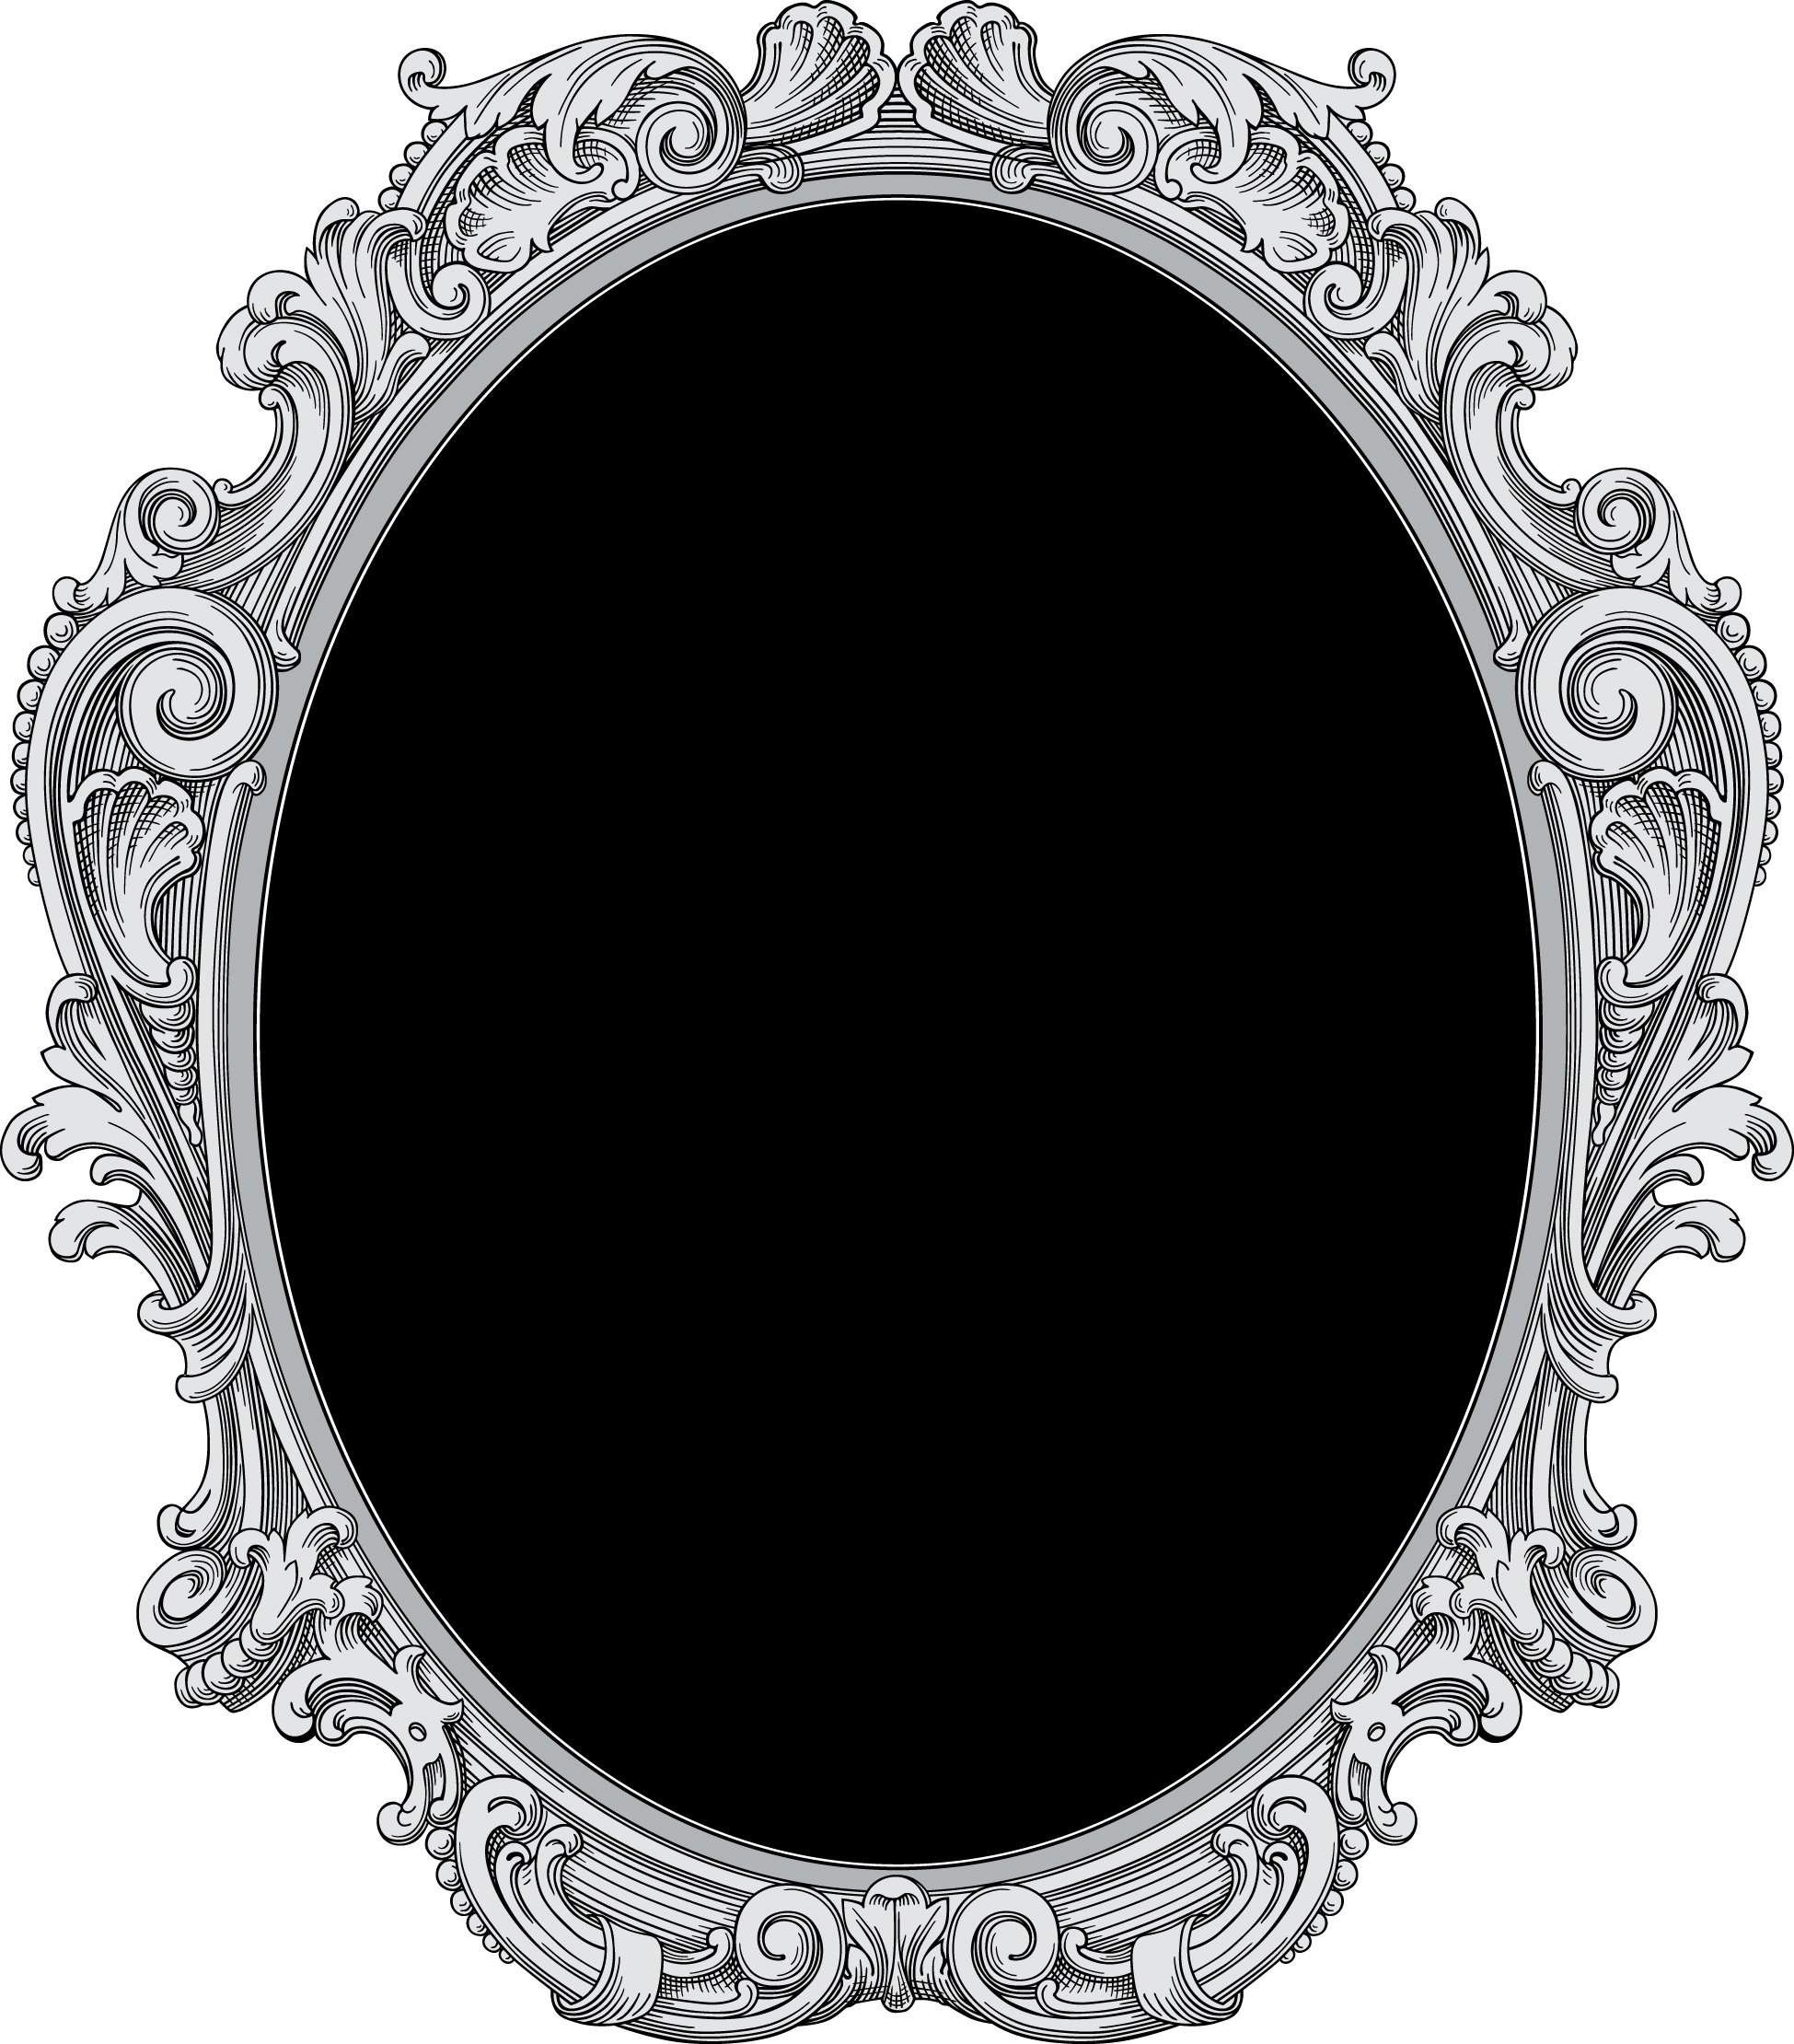 Vector Gothic Borders and Frames